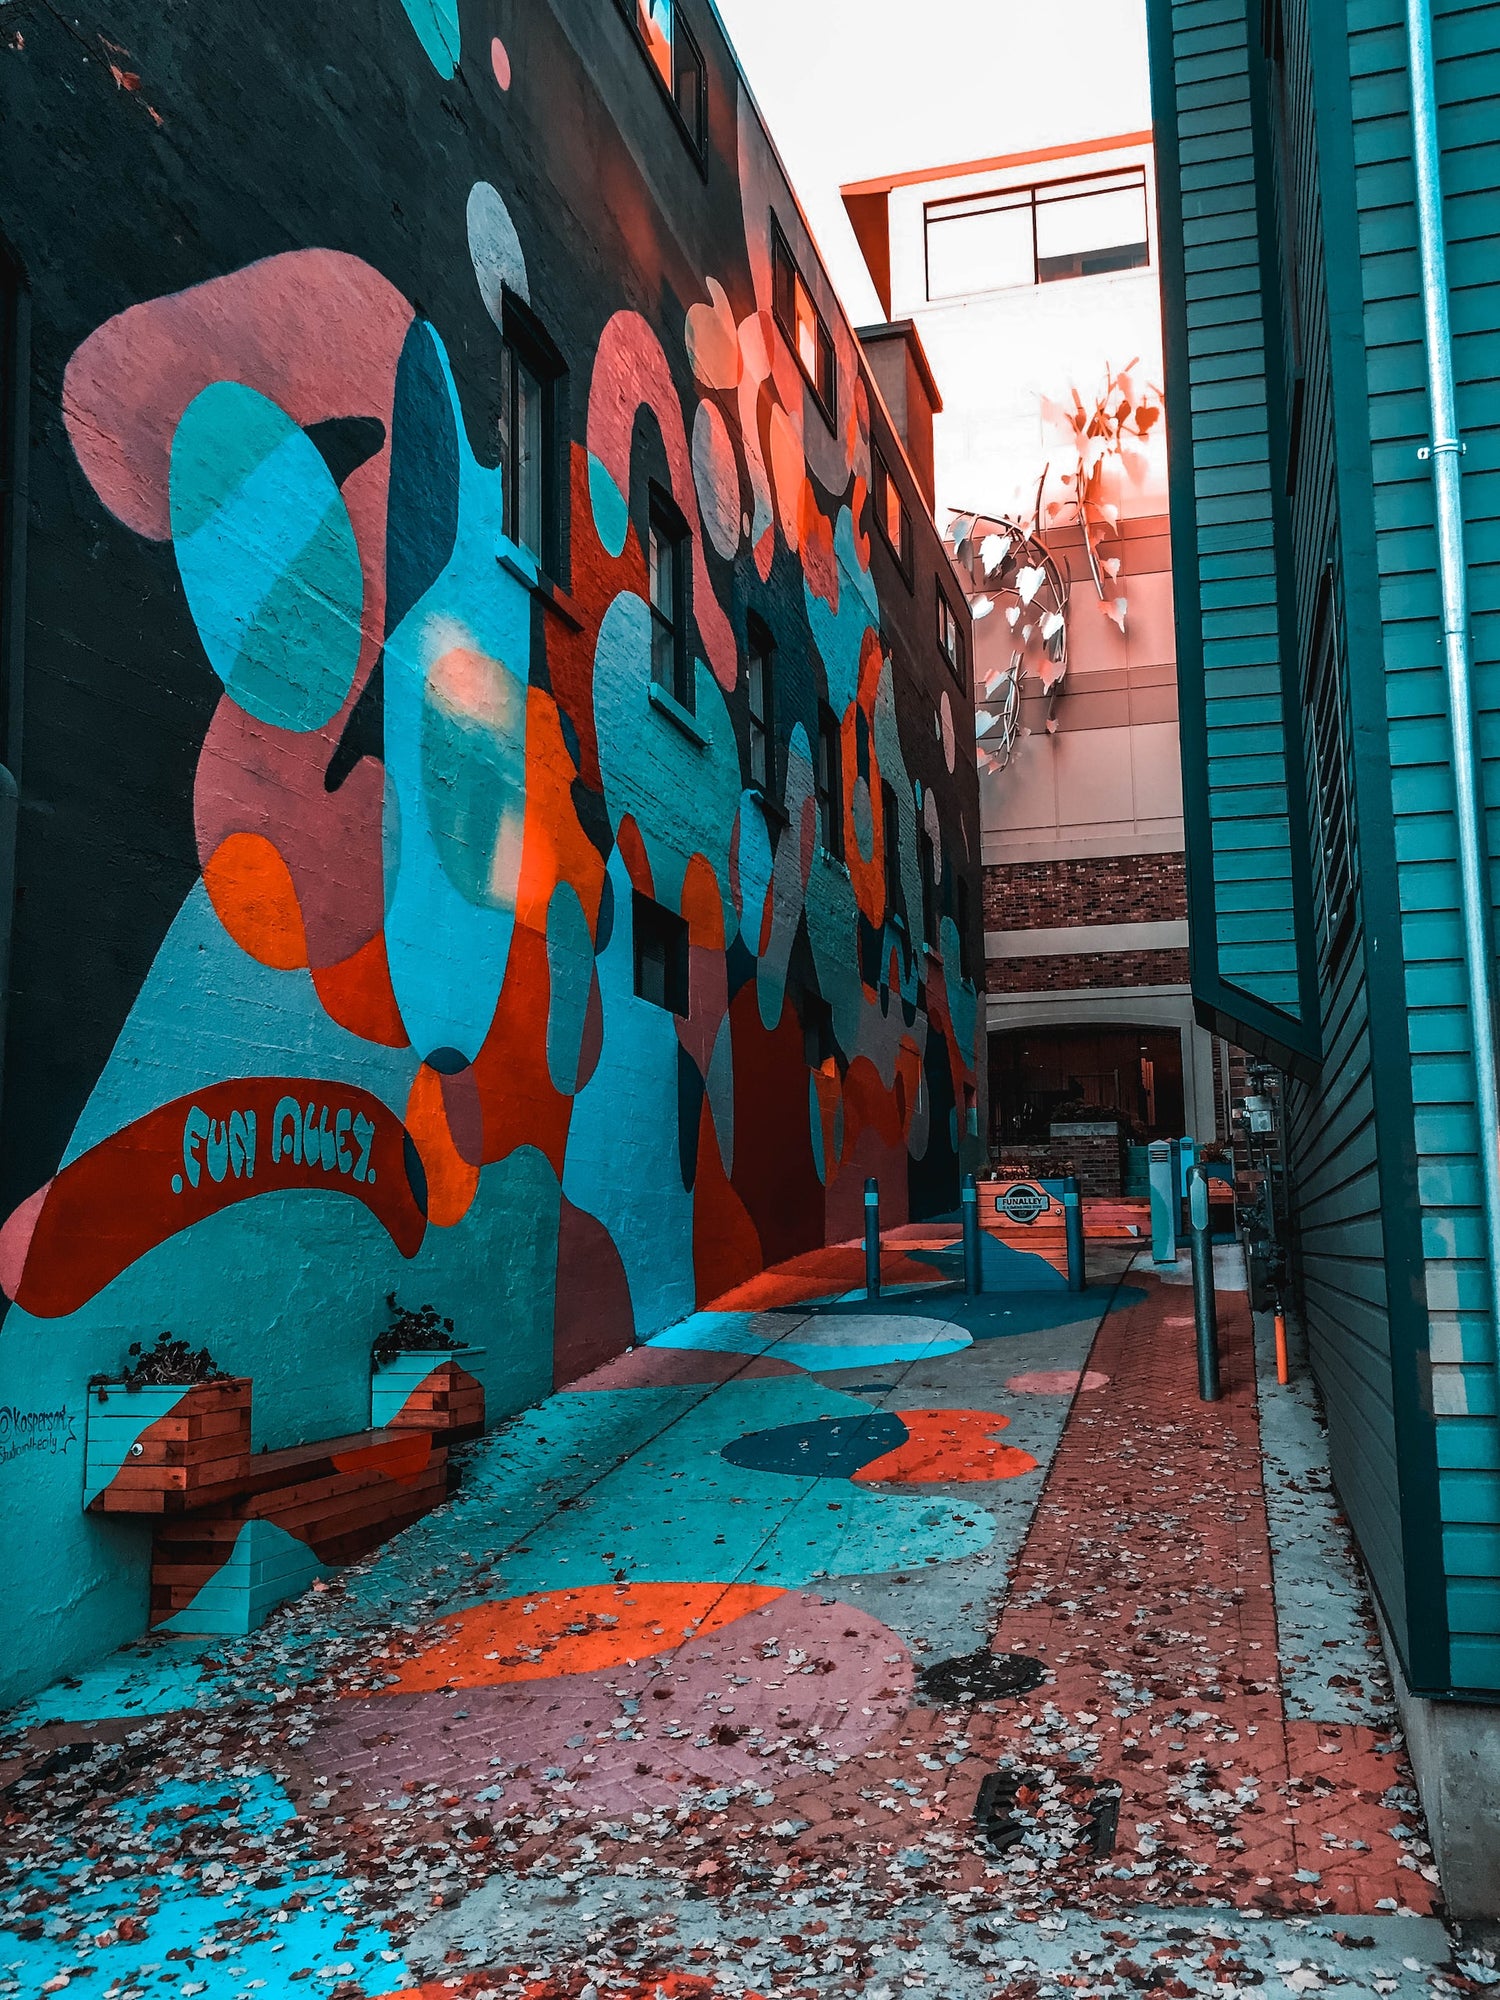 Community Mural in North Vancouver. Custom murals to enhance your community or municipality are available at Vancity Postering. Photo by Vlad Bunu on Unsplash